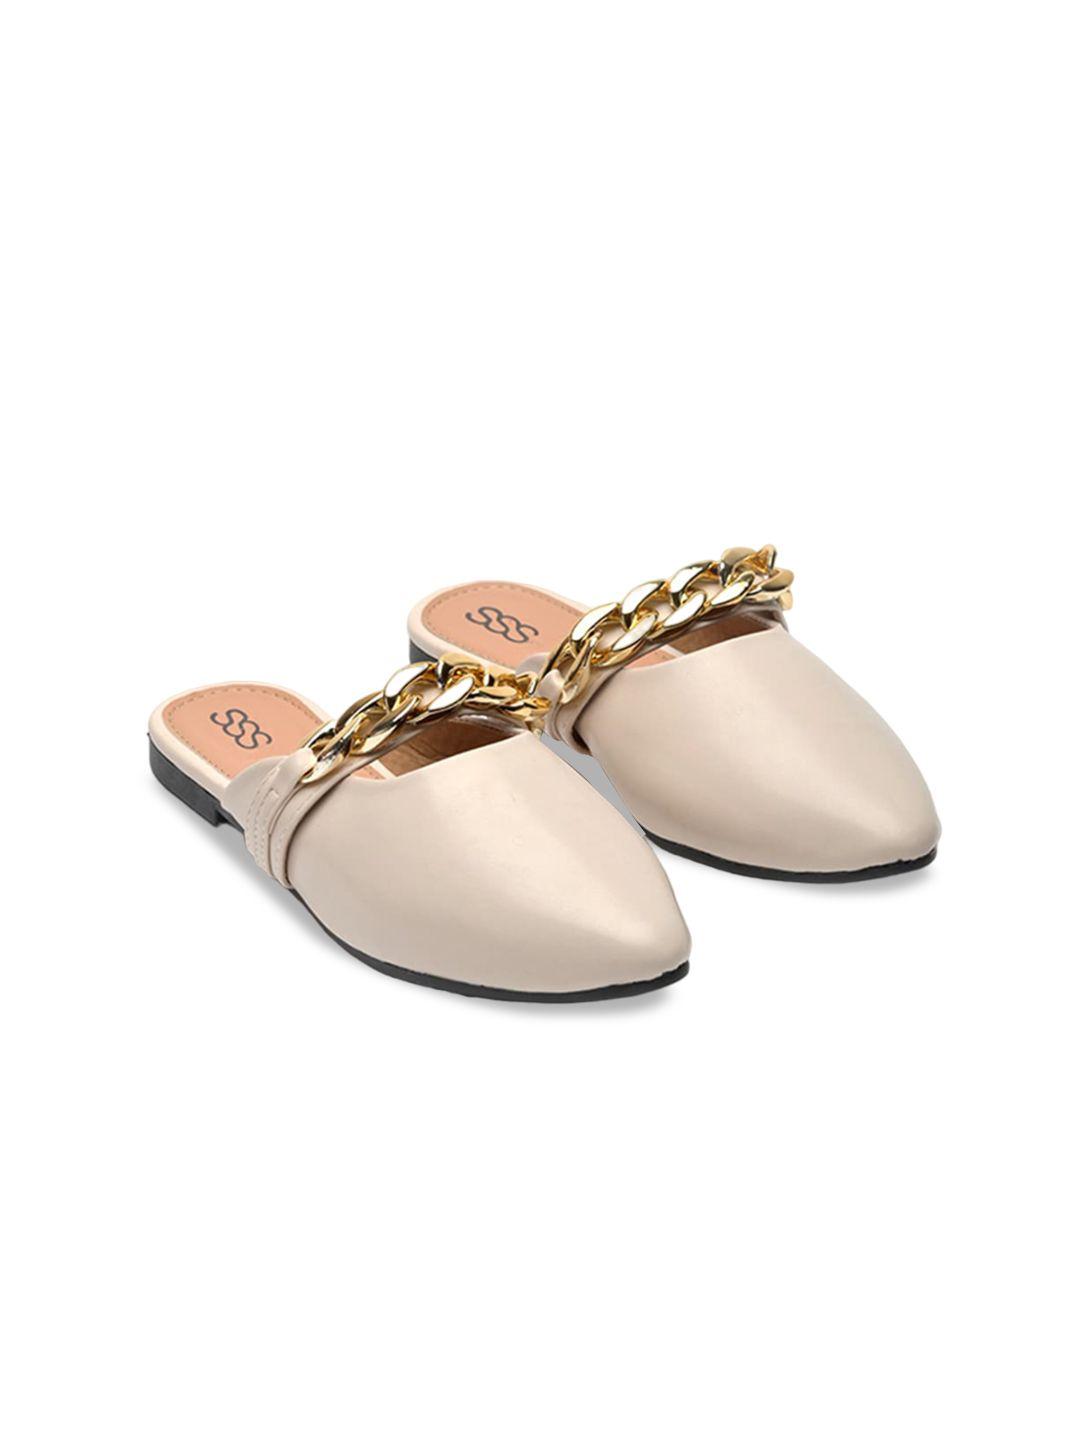 street style store women pointed toe embellished  mules